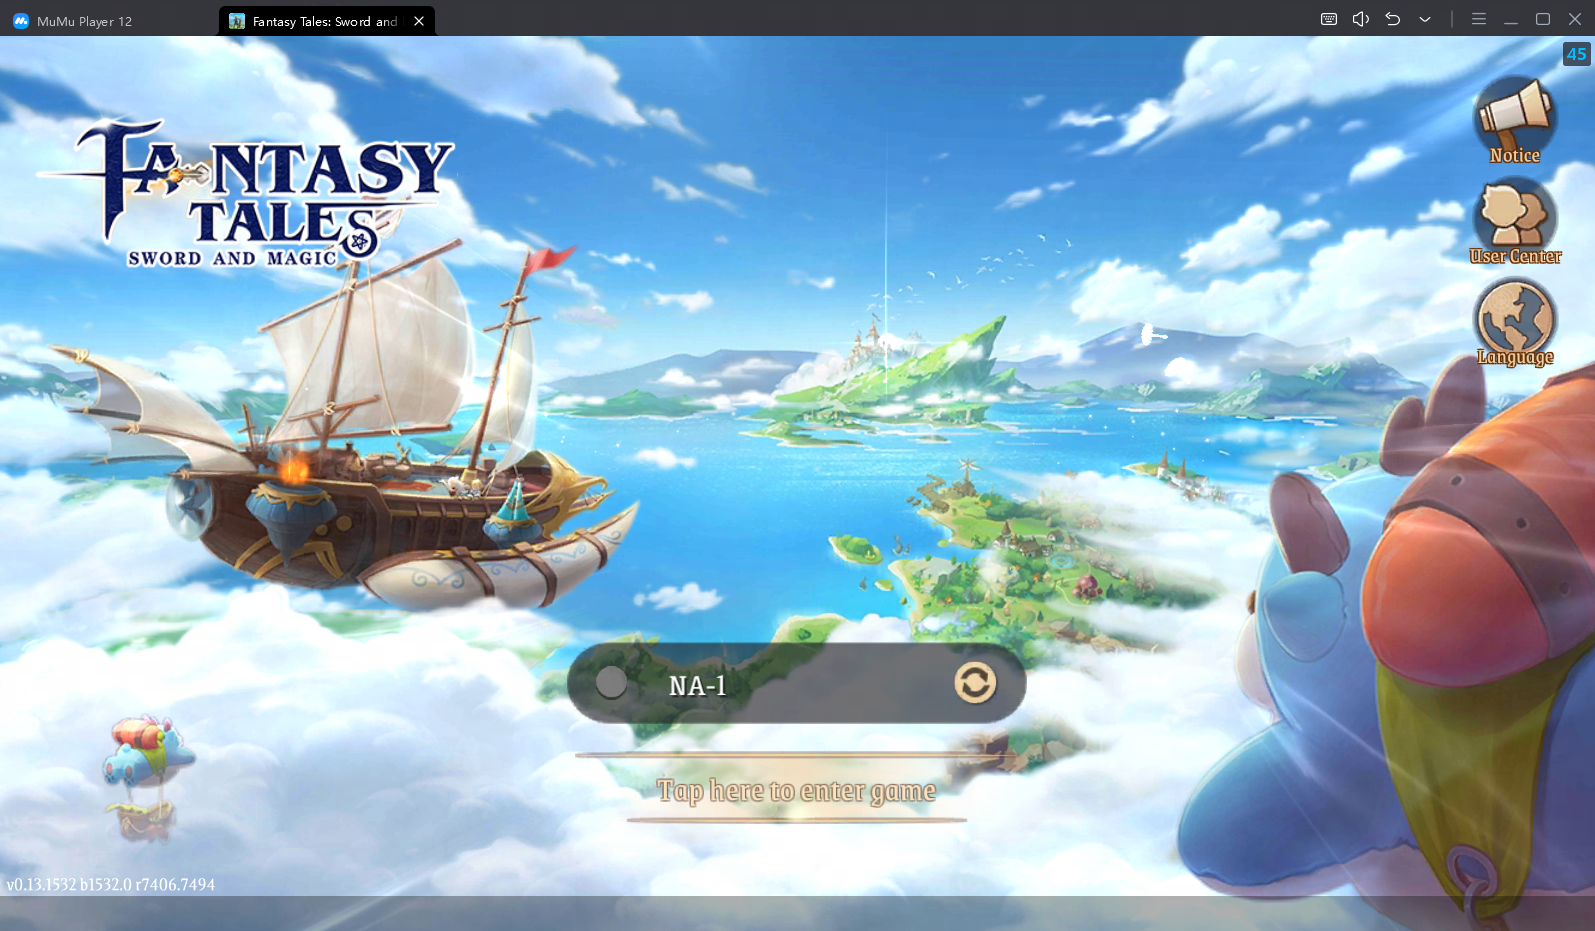 play fantasy tales sword and magic on pc